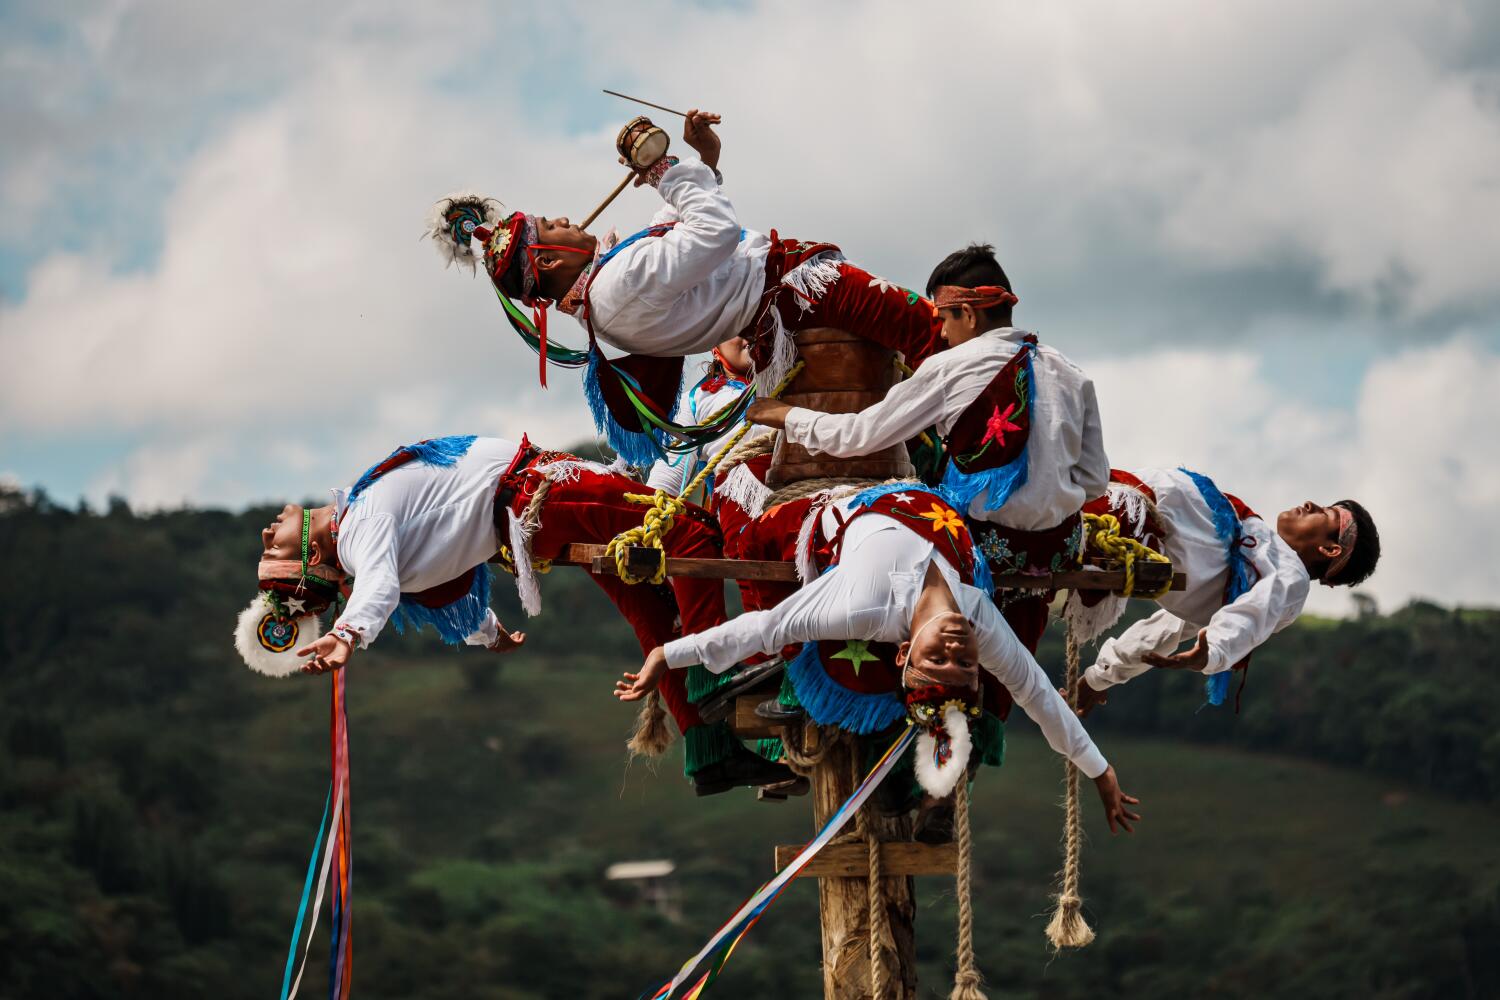 Mexico's fliers: An ancient tradition from 100 feet up